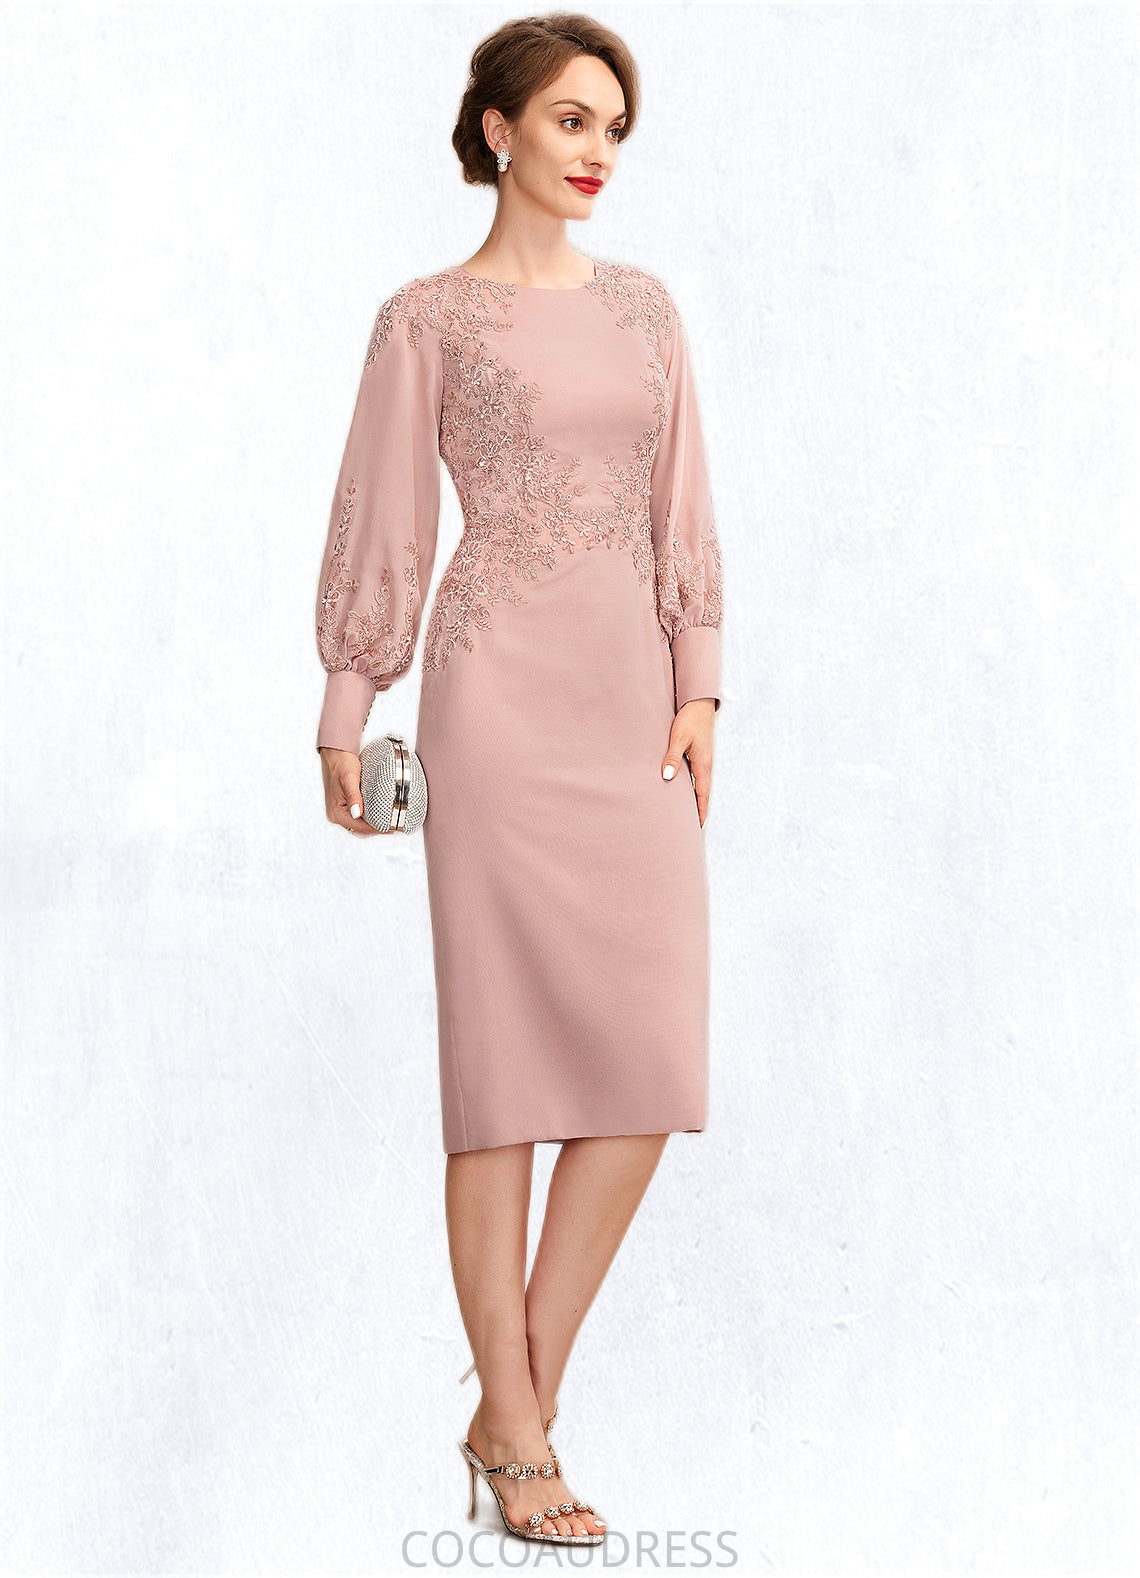 Autumn Sheath/Column Scoop Neck Knee-Length Chiffon Lace Mother of the Bride Dress With Beading Sequins 126P0015020